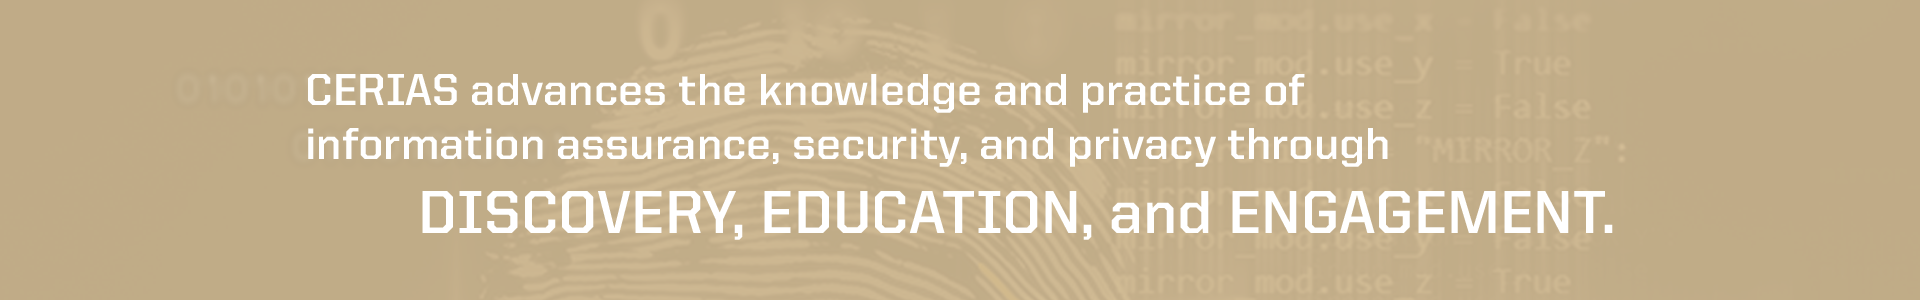 CERIAS advances the knowledge and practice of information assurance, security, and privacy through discovery, education, and engagement.